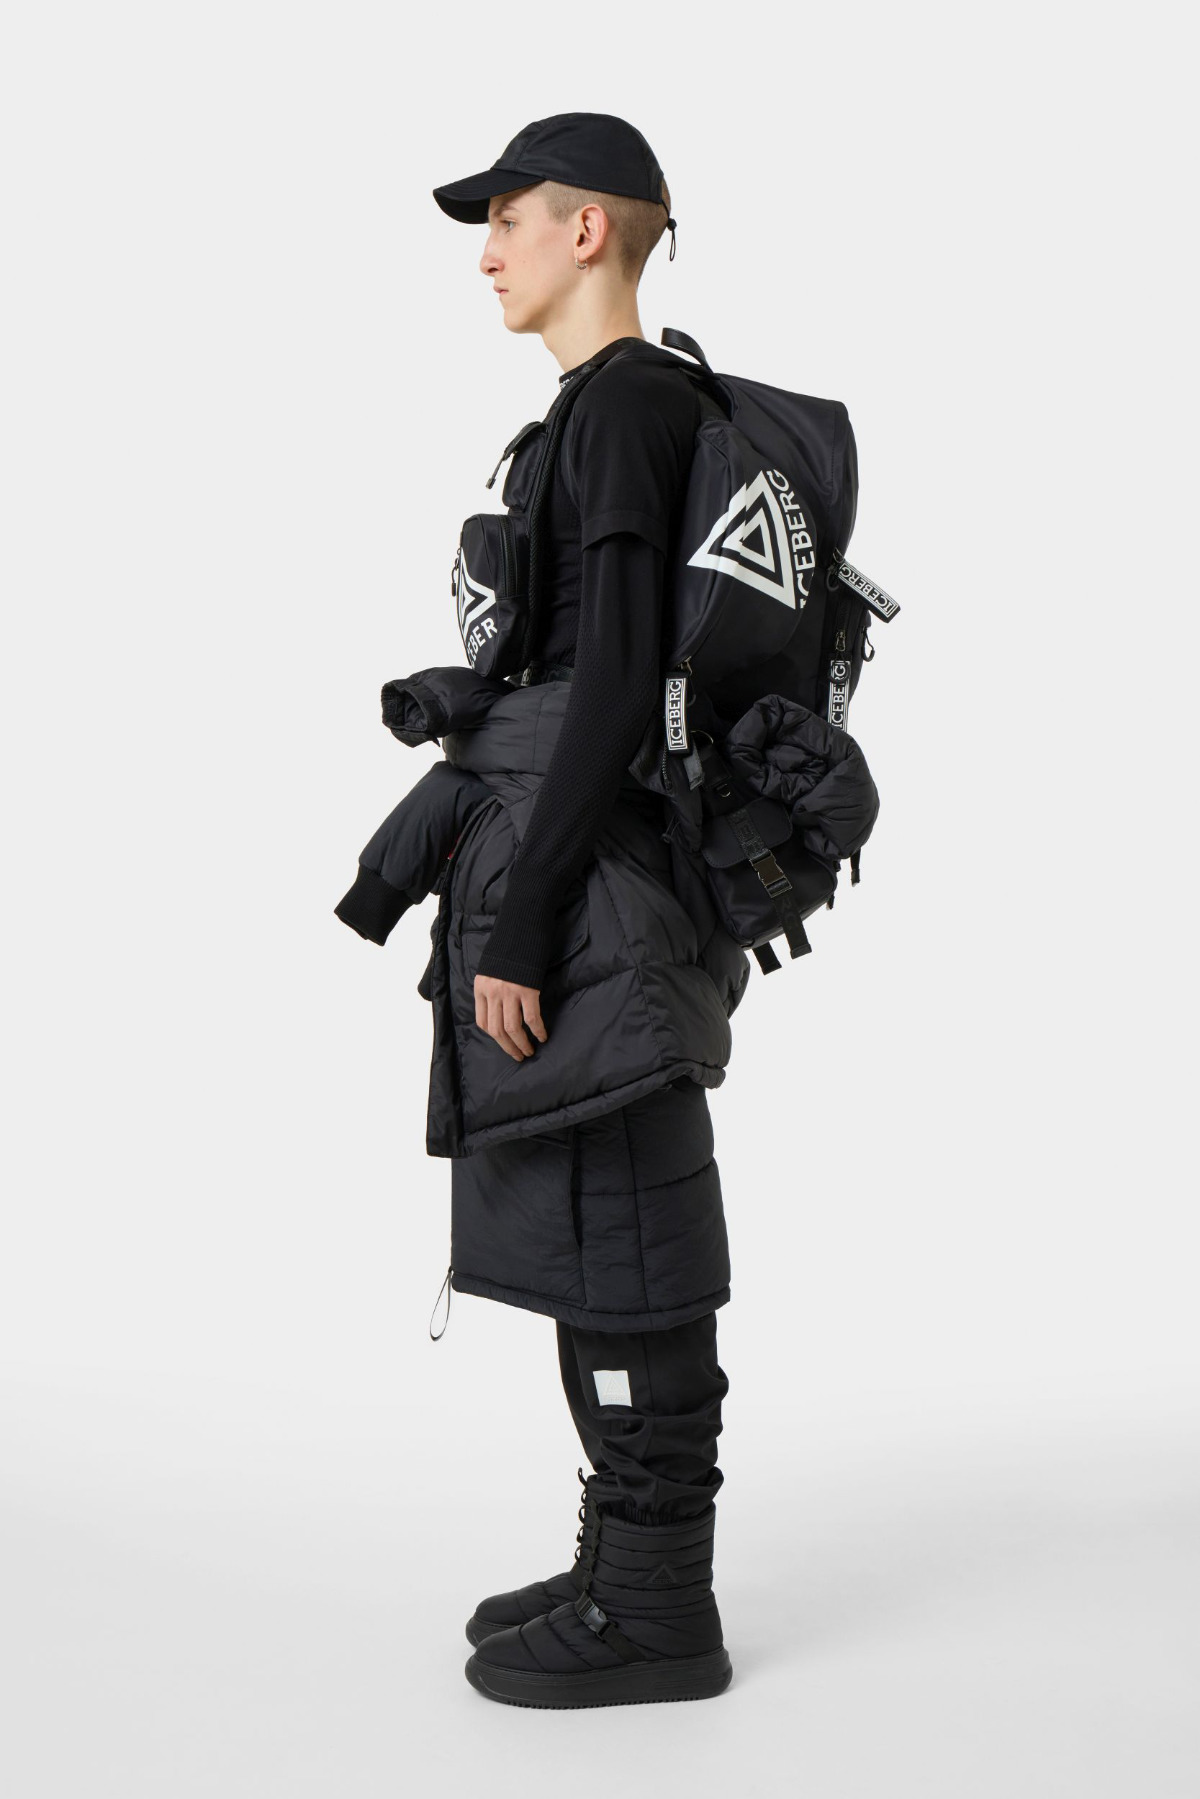 BACK IN BLACK With ICEBERG's Autumn-Winter 2022 Show Collection